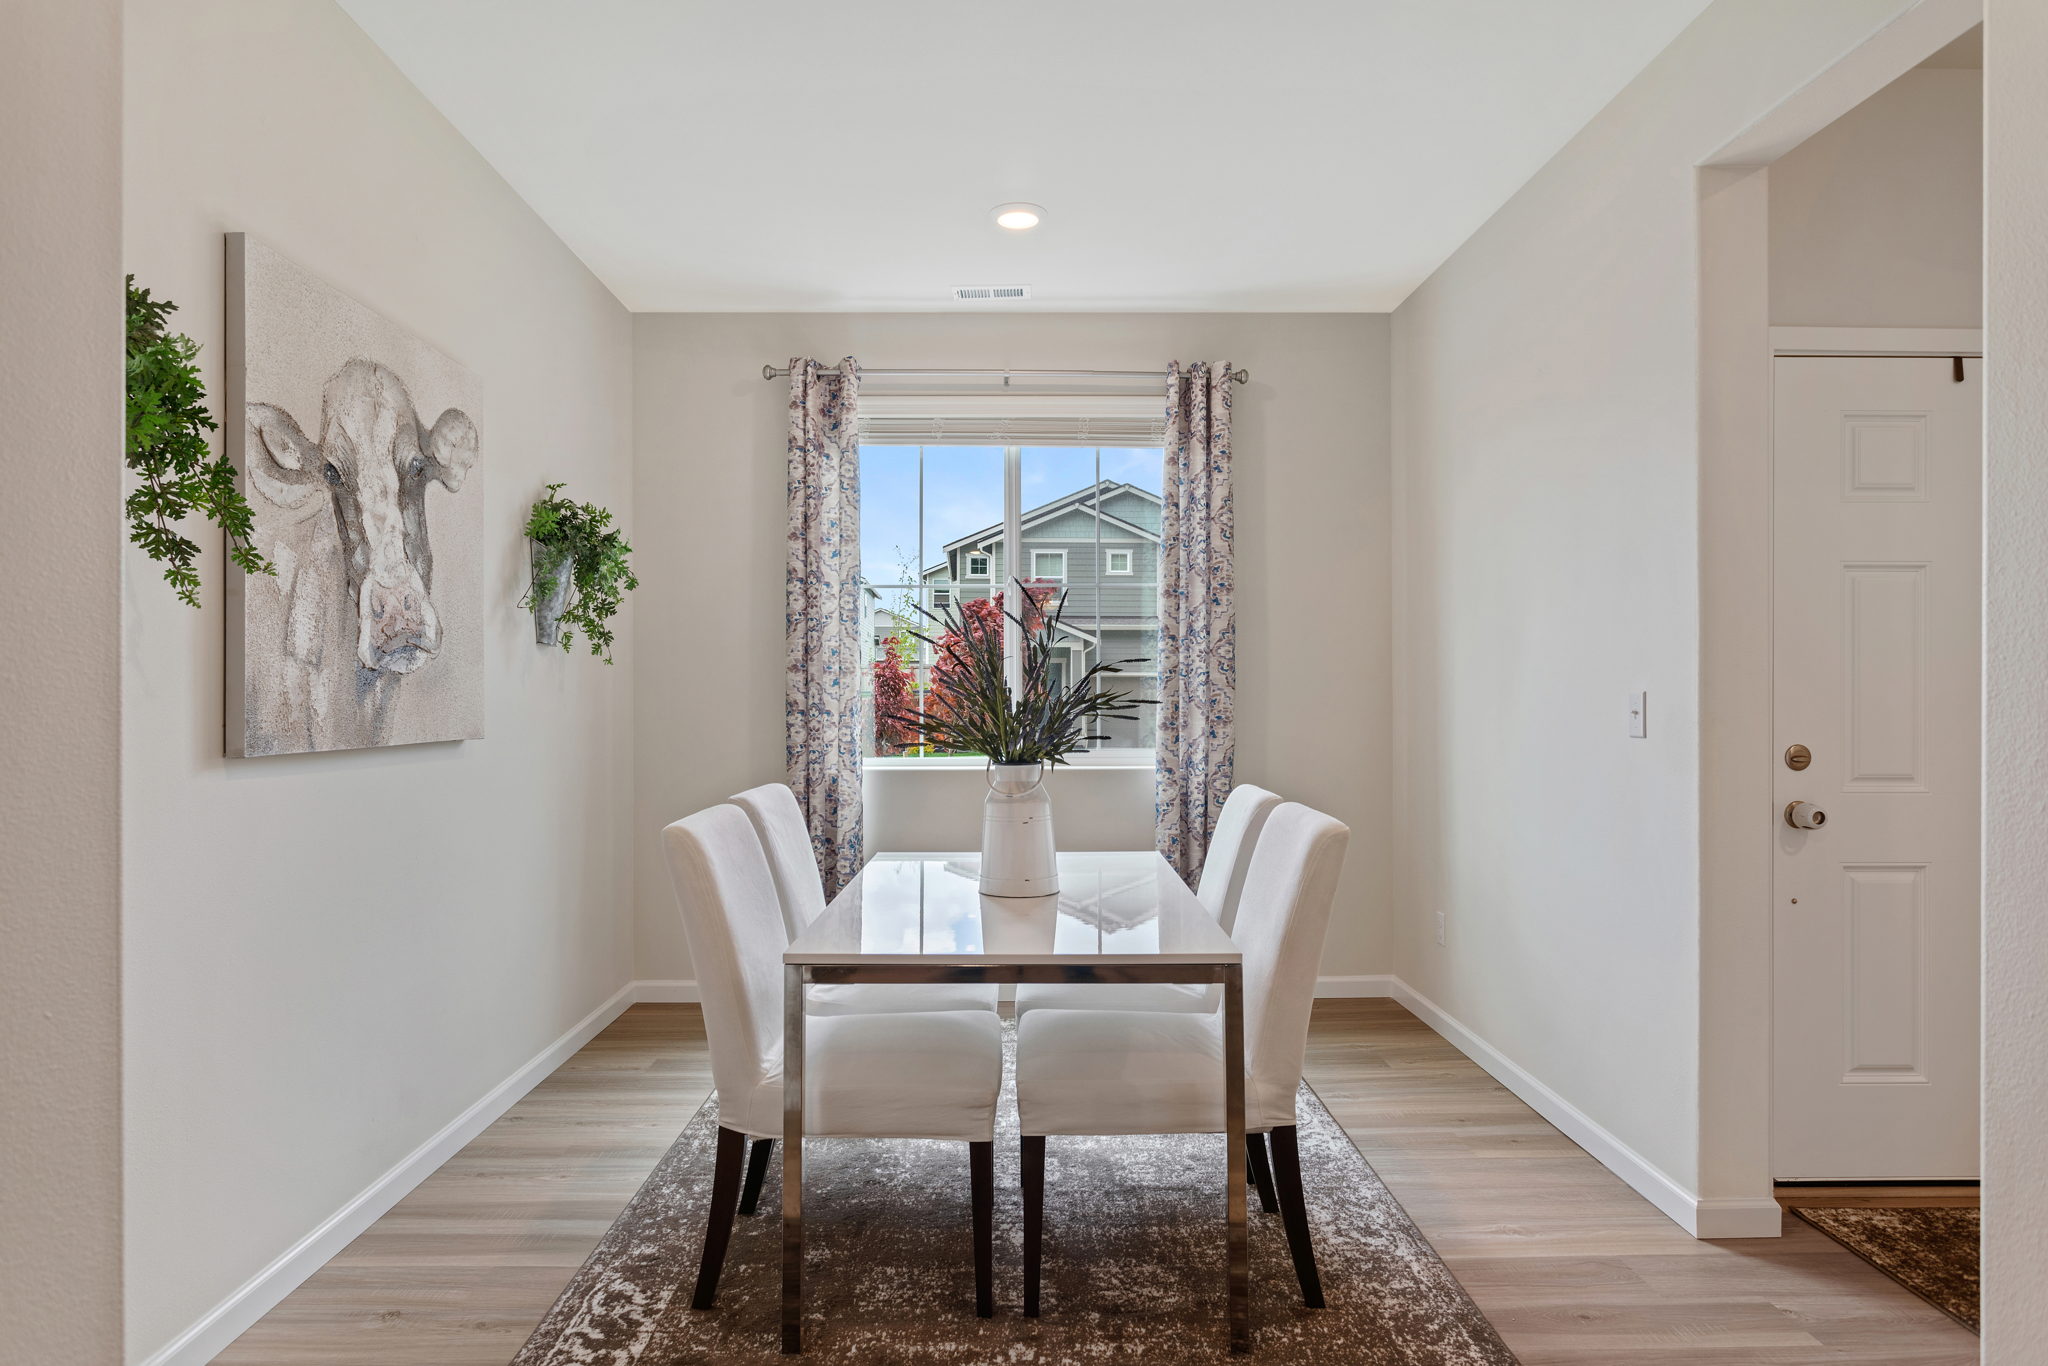 Large Dining room with big picture window lets in the sunlight